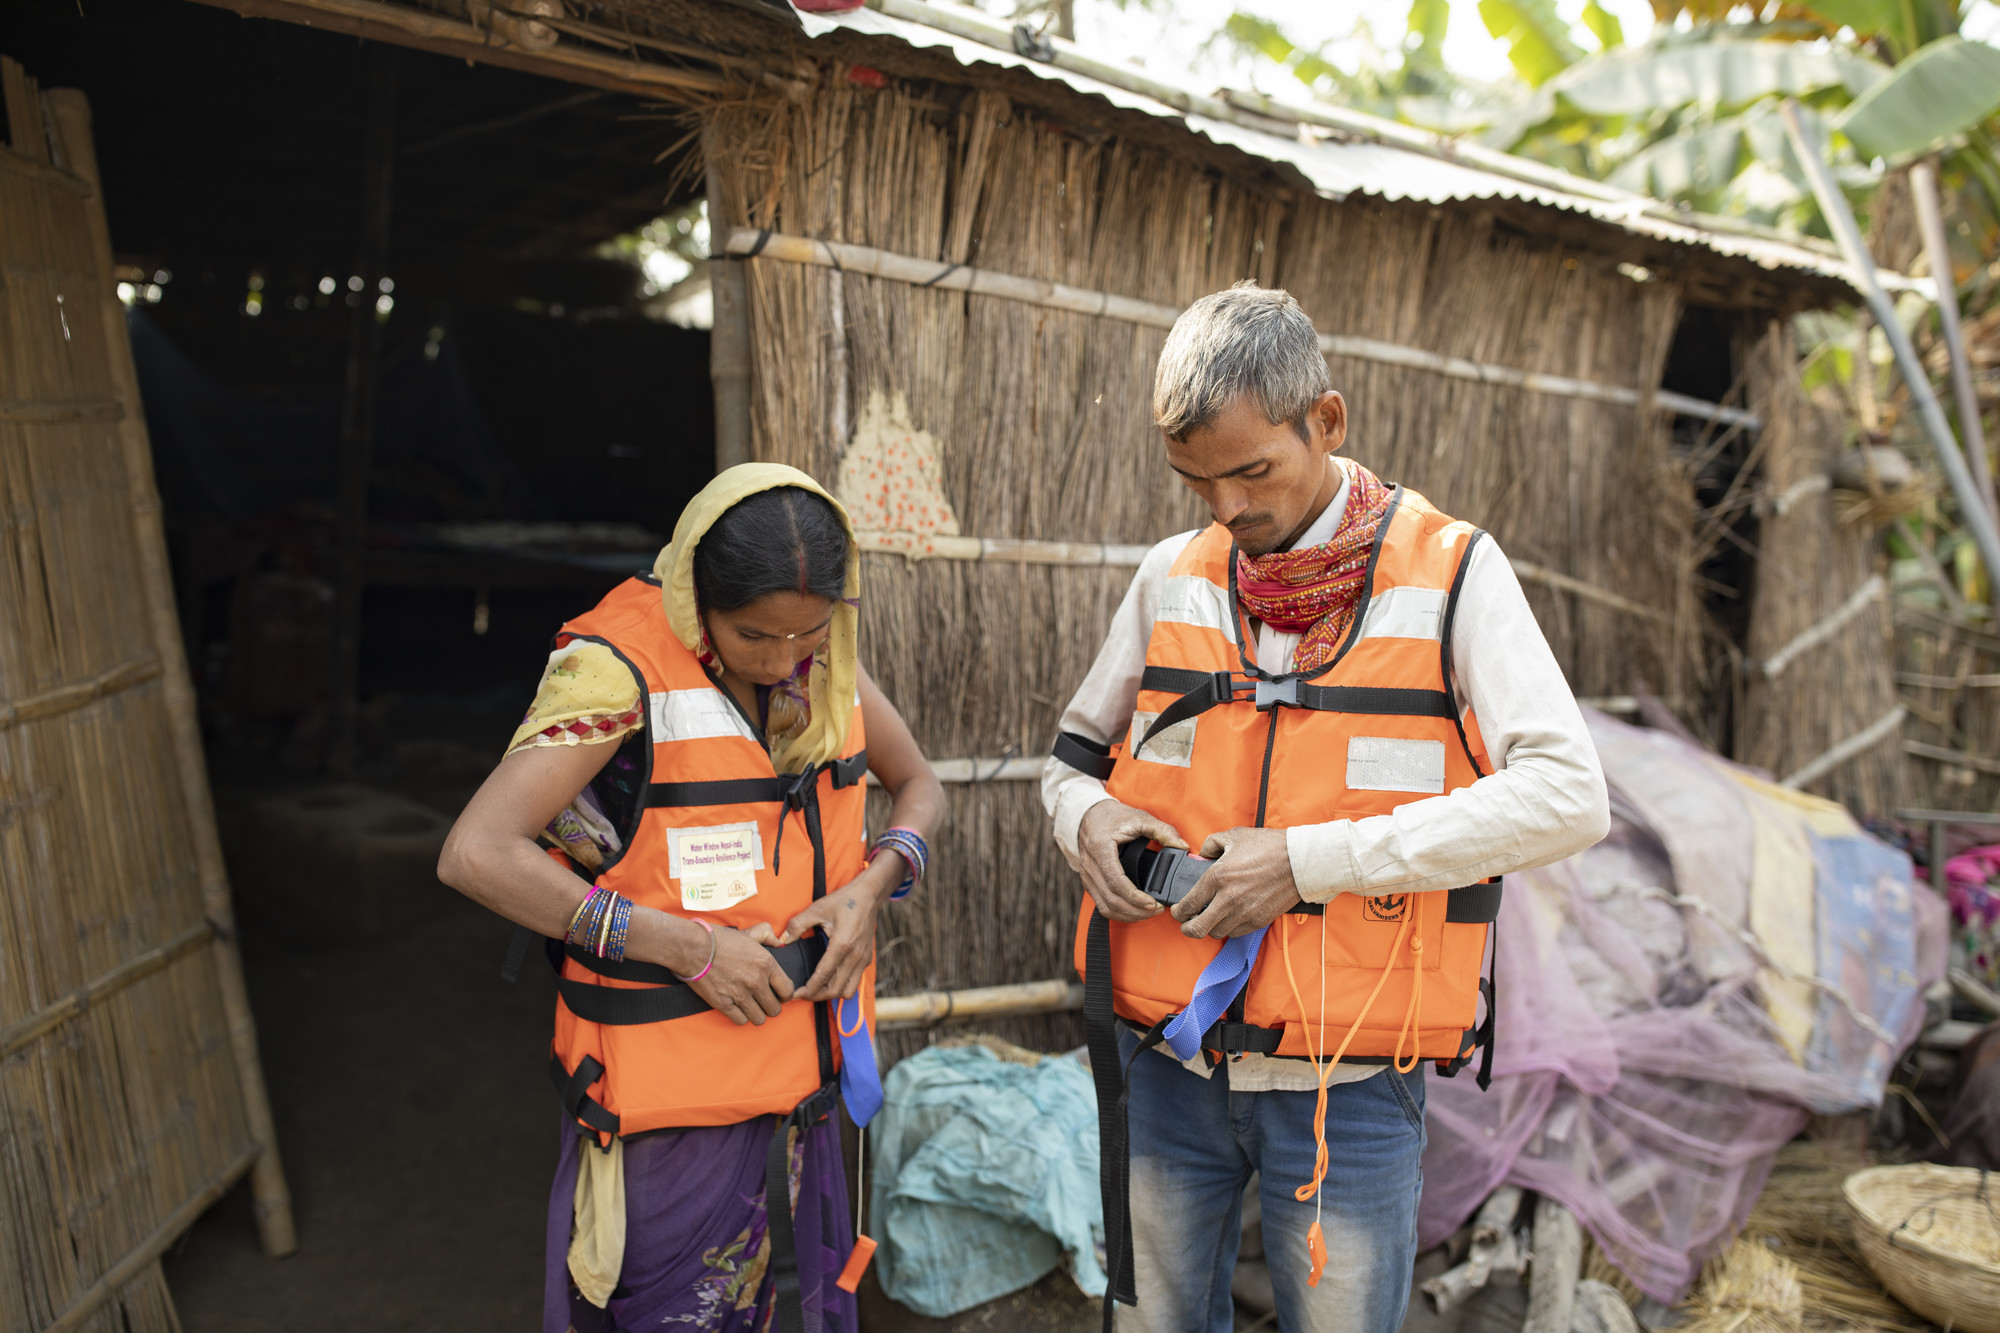 A woman and a man clip on orange life vests in front of a thatched house